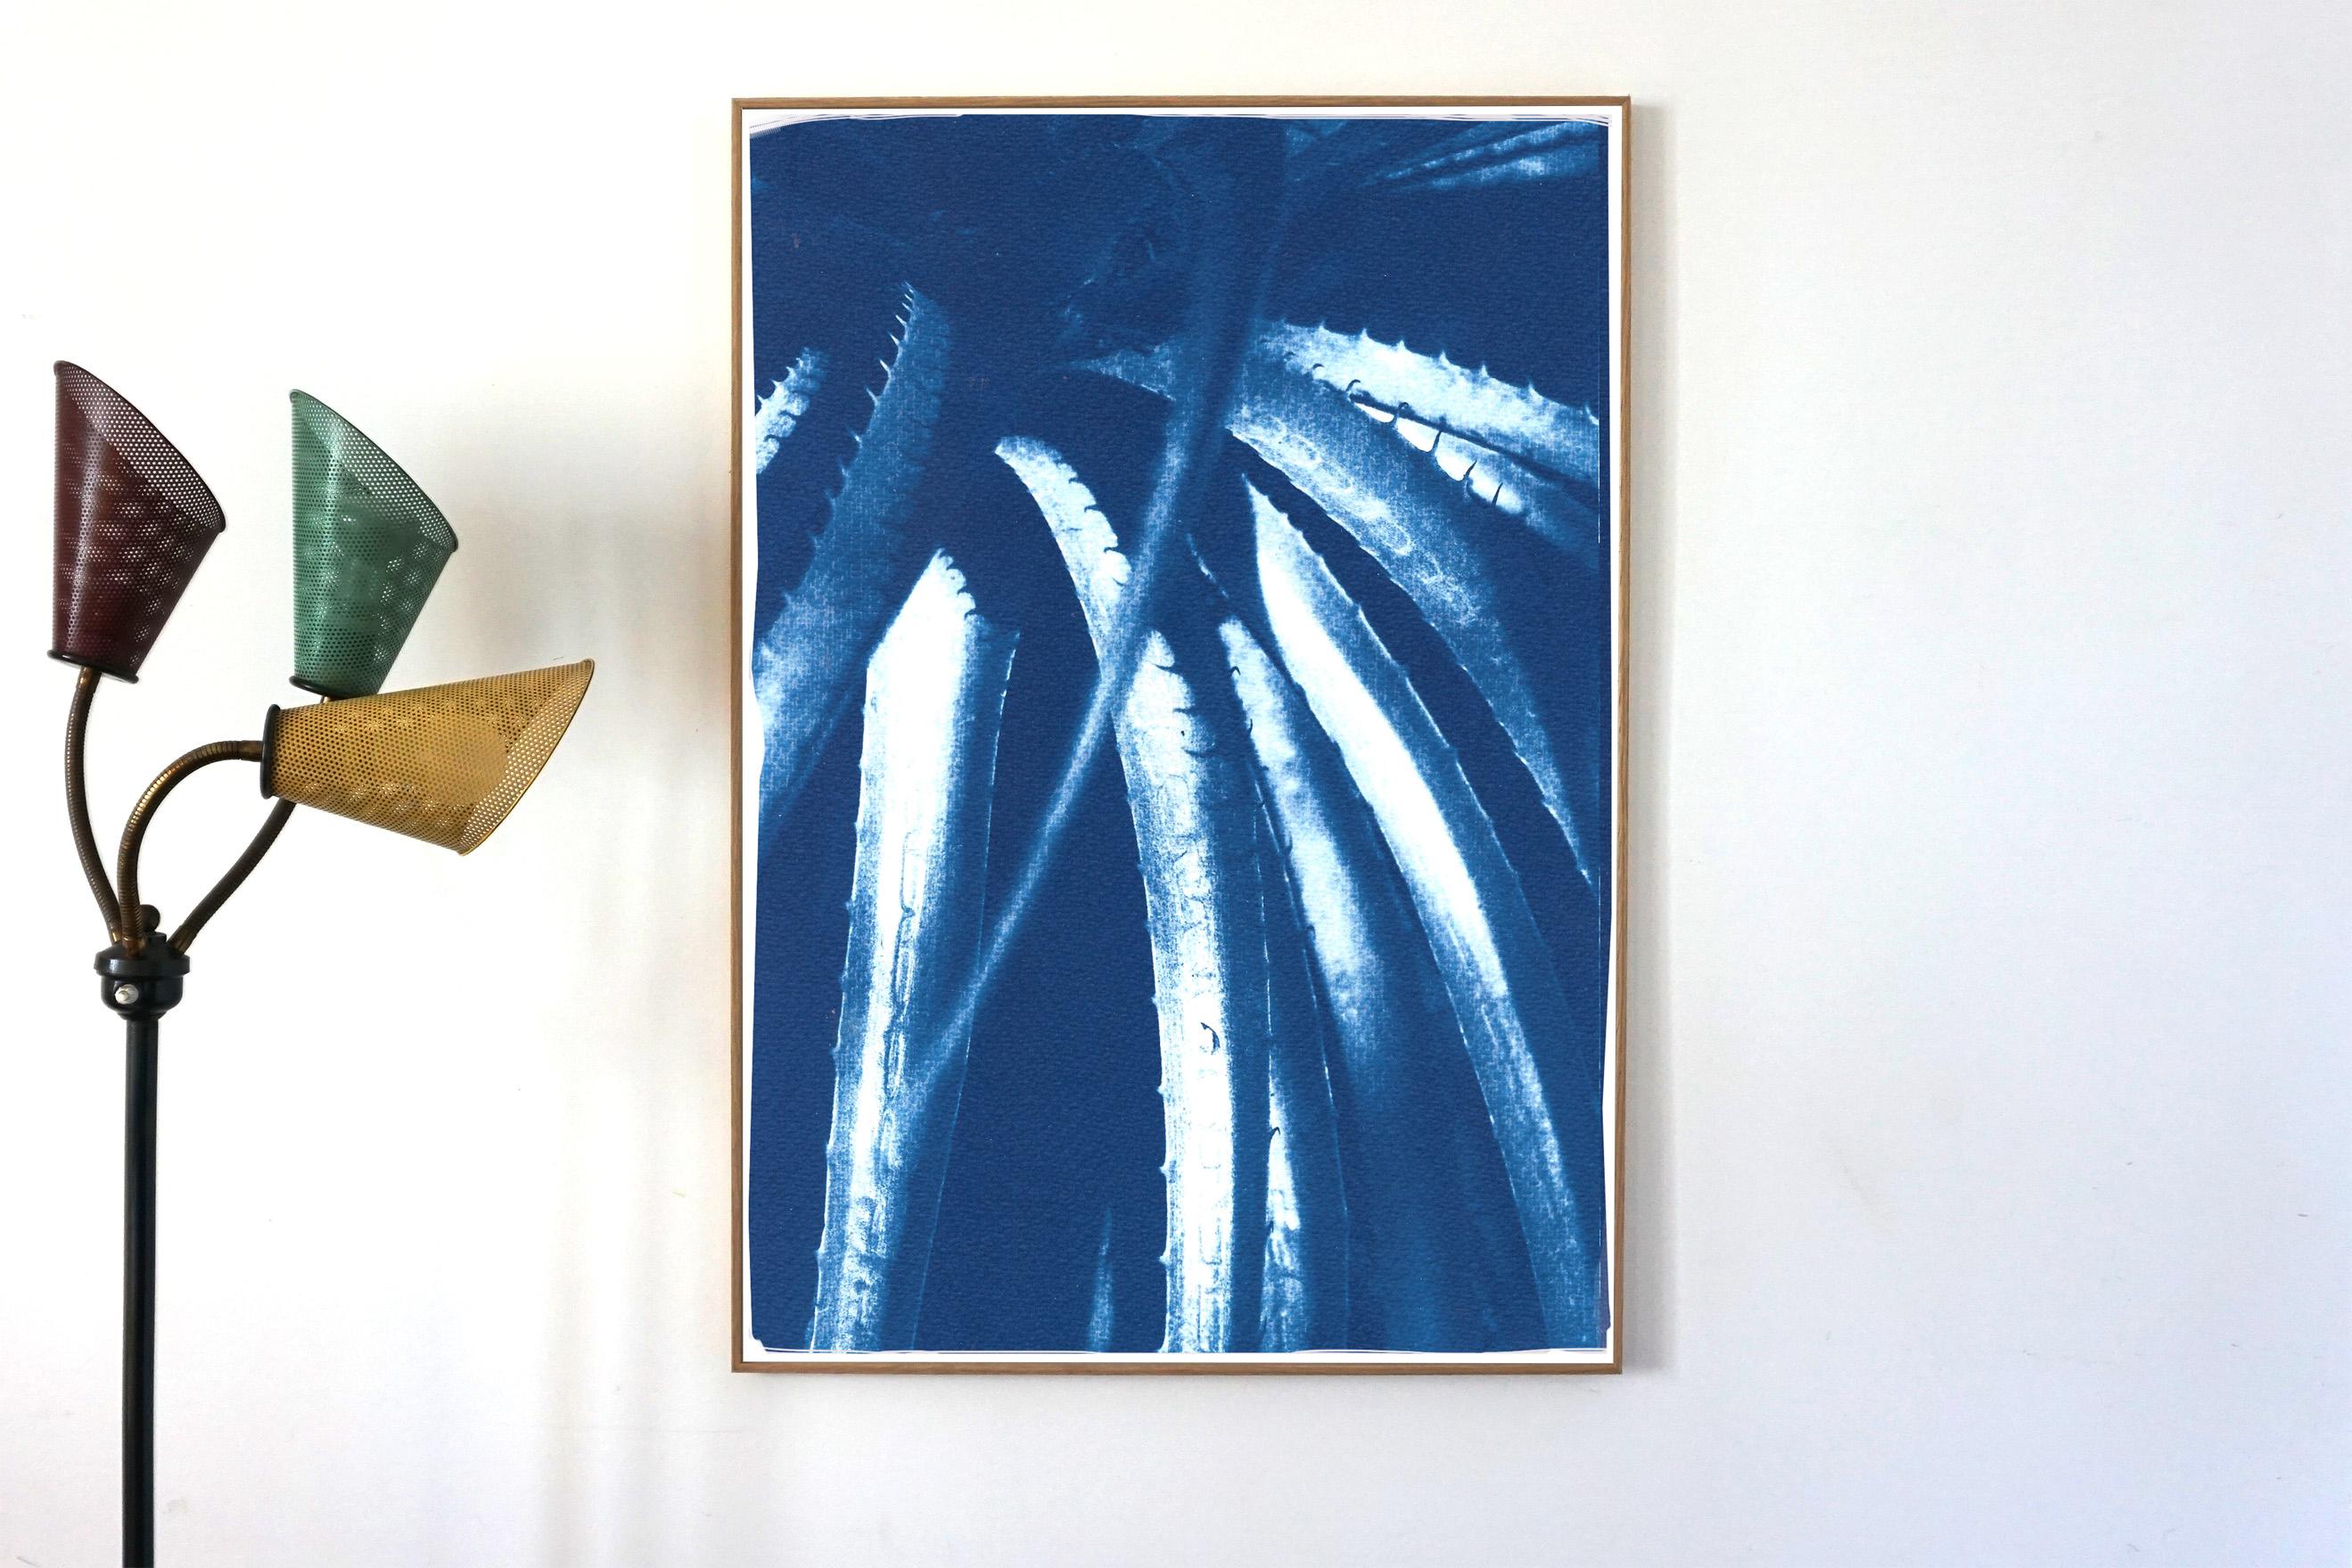 This is an exclusive handprinted limited edition cyanotype of a beautiful Aloe plant.

Details:
+ Title: Jurassic Aloe Leaves
+ Year: 2022
+ Edition Size: 100
+ Stamped and Certificate of Authenticity provided
+ Measurements : 70x100 cm (28x 40